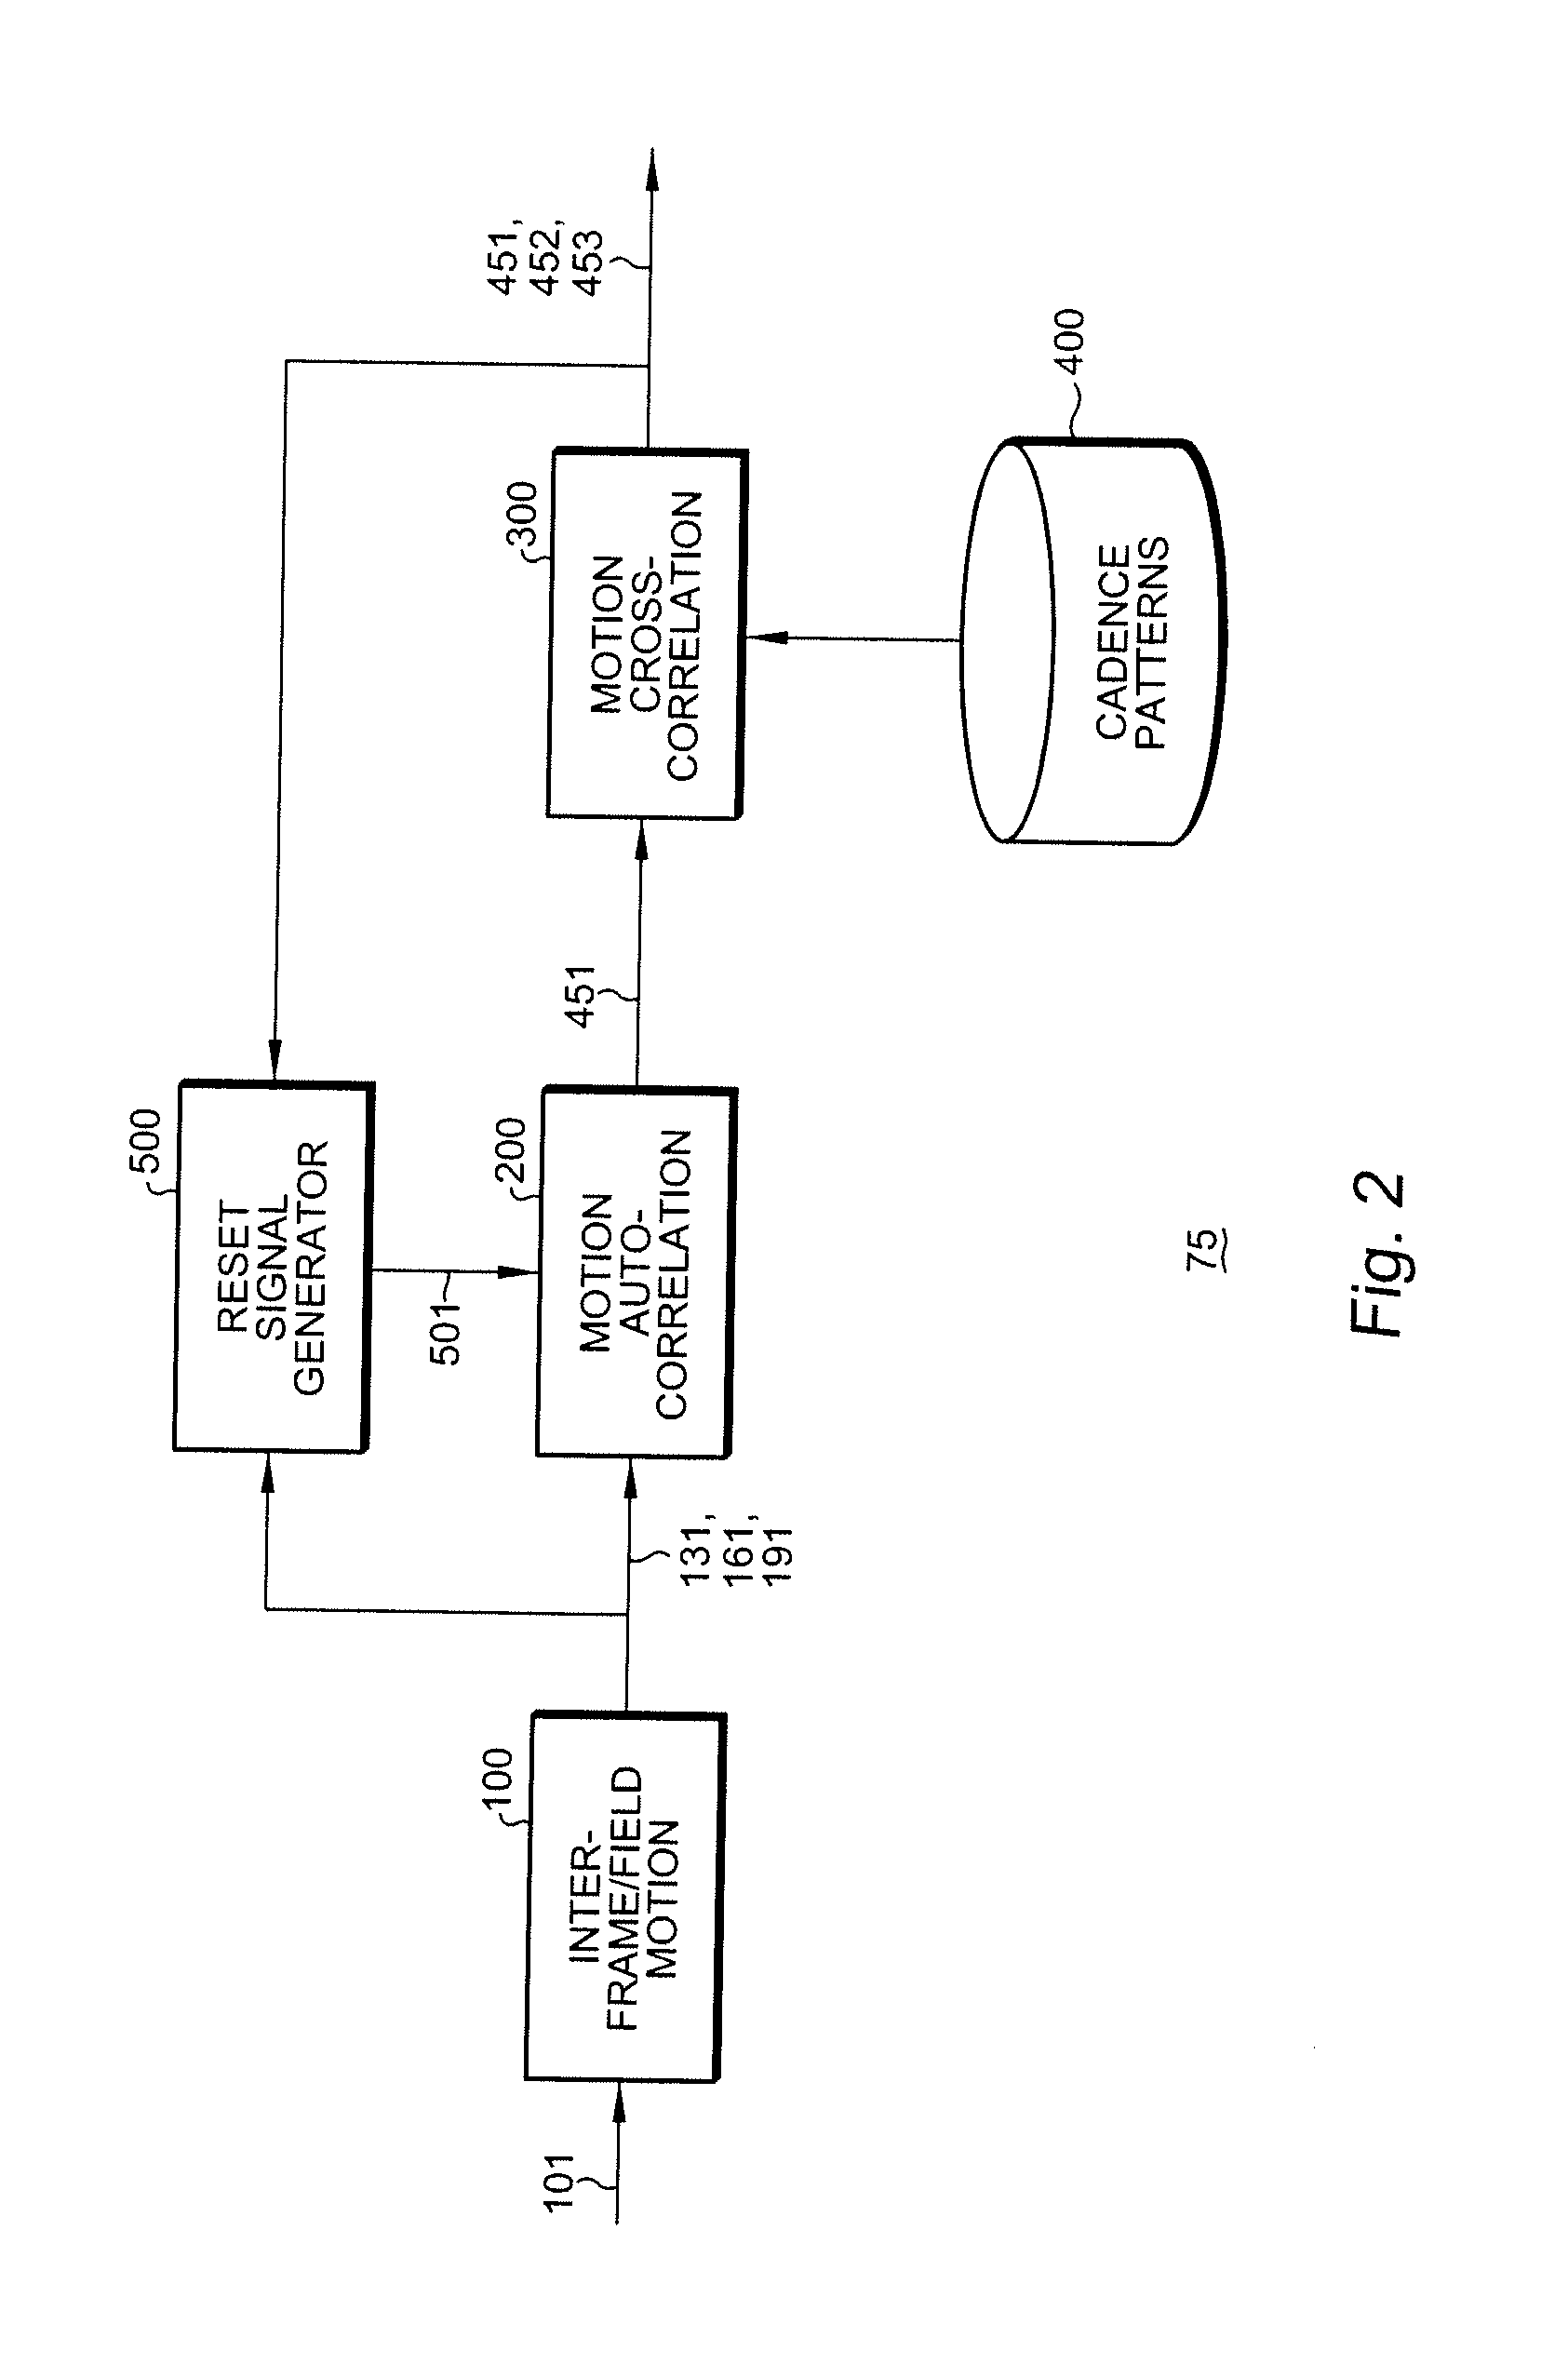 Apparatus and method for exotic cadence detection